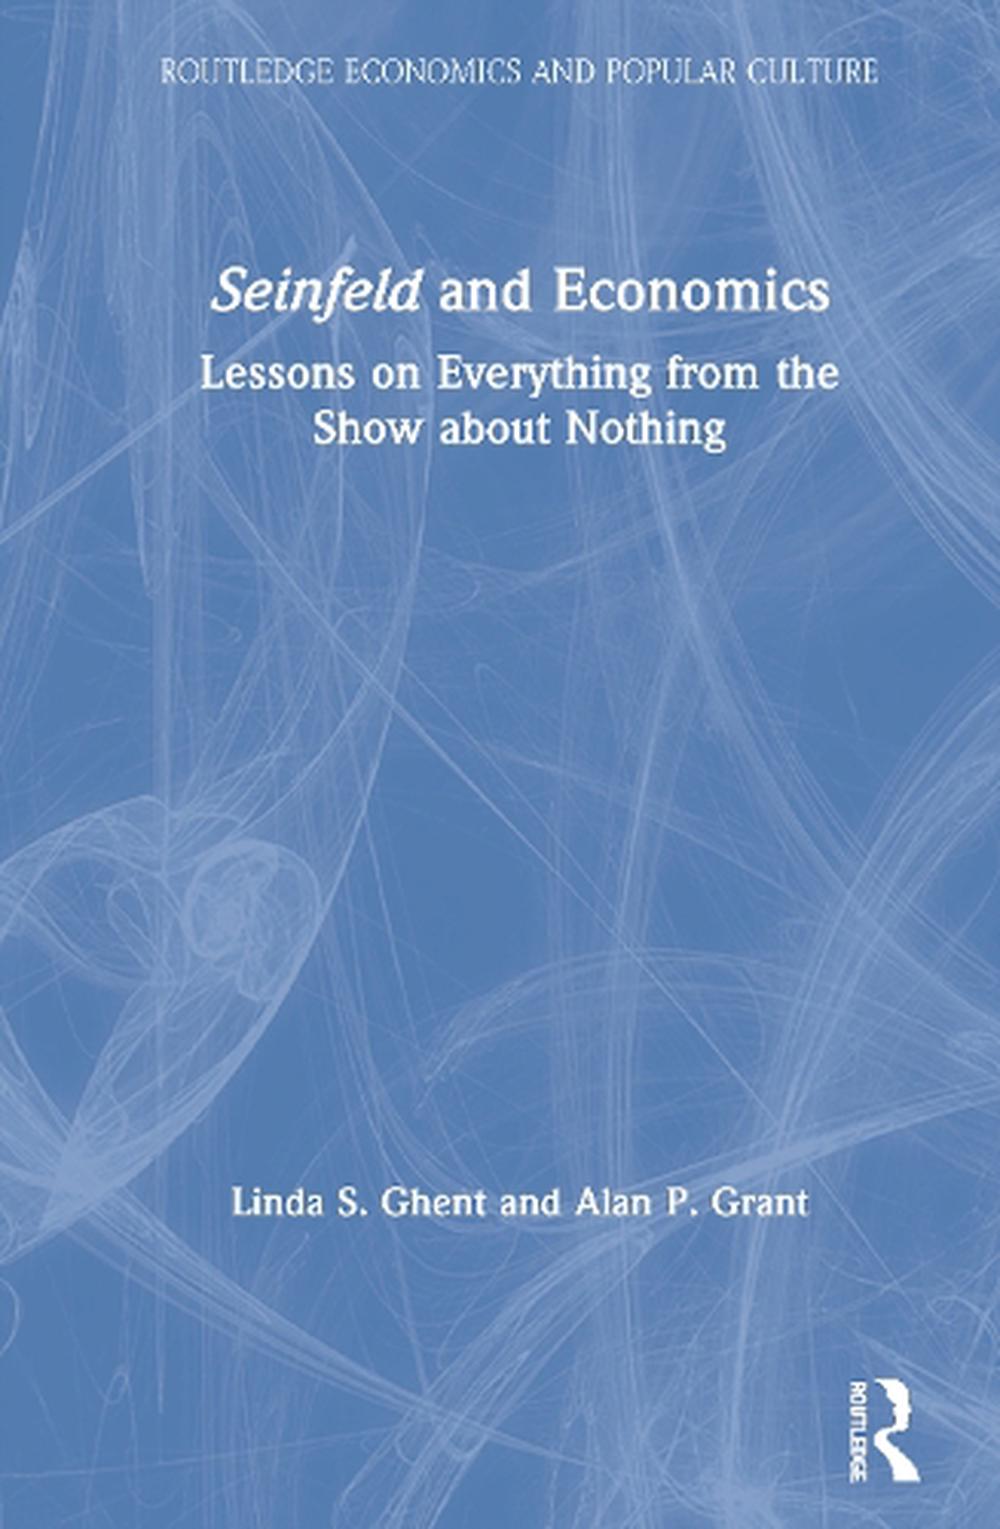 Seinfeld and Economics by Linda S. Ghent